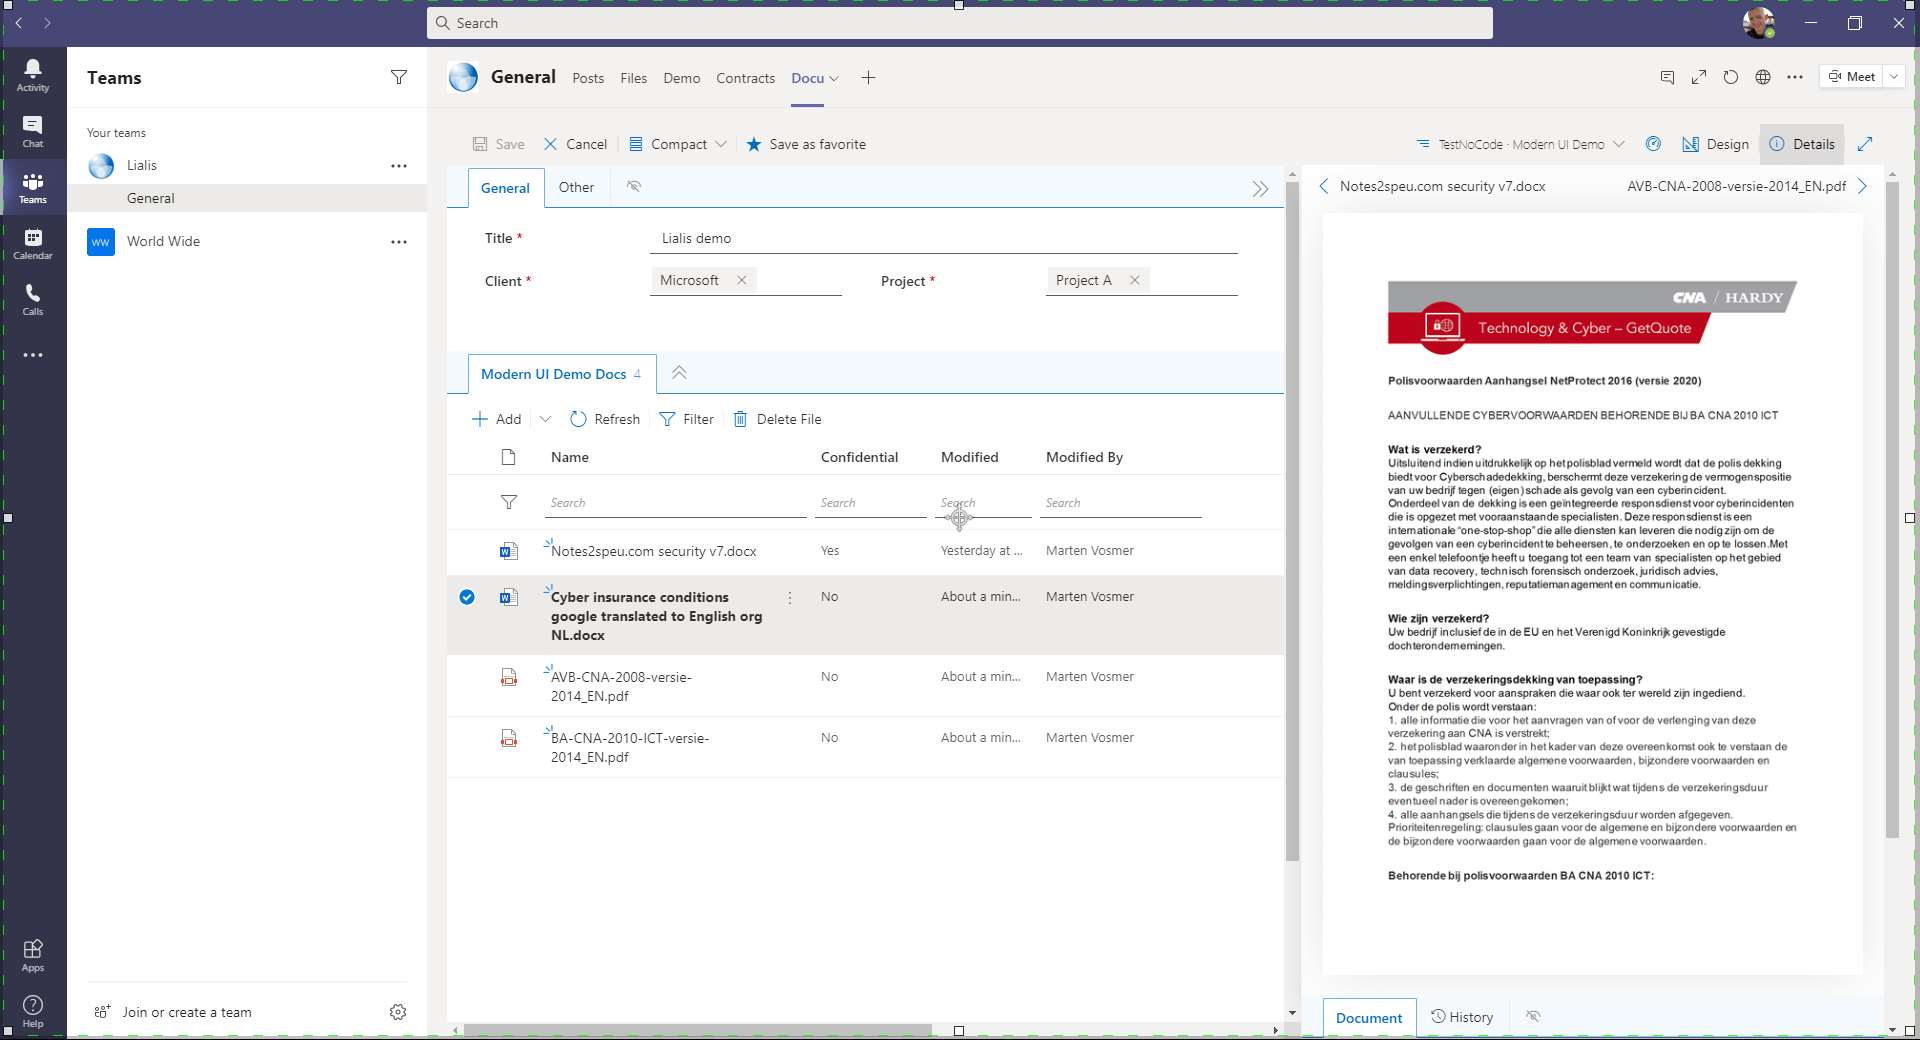 Shareflex Microsoft Teams SharePoint integration working with files